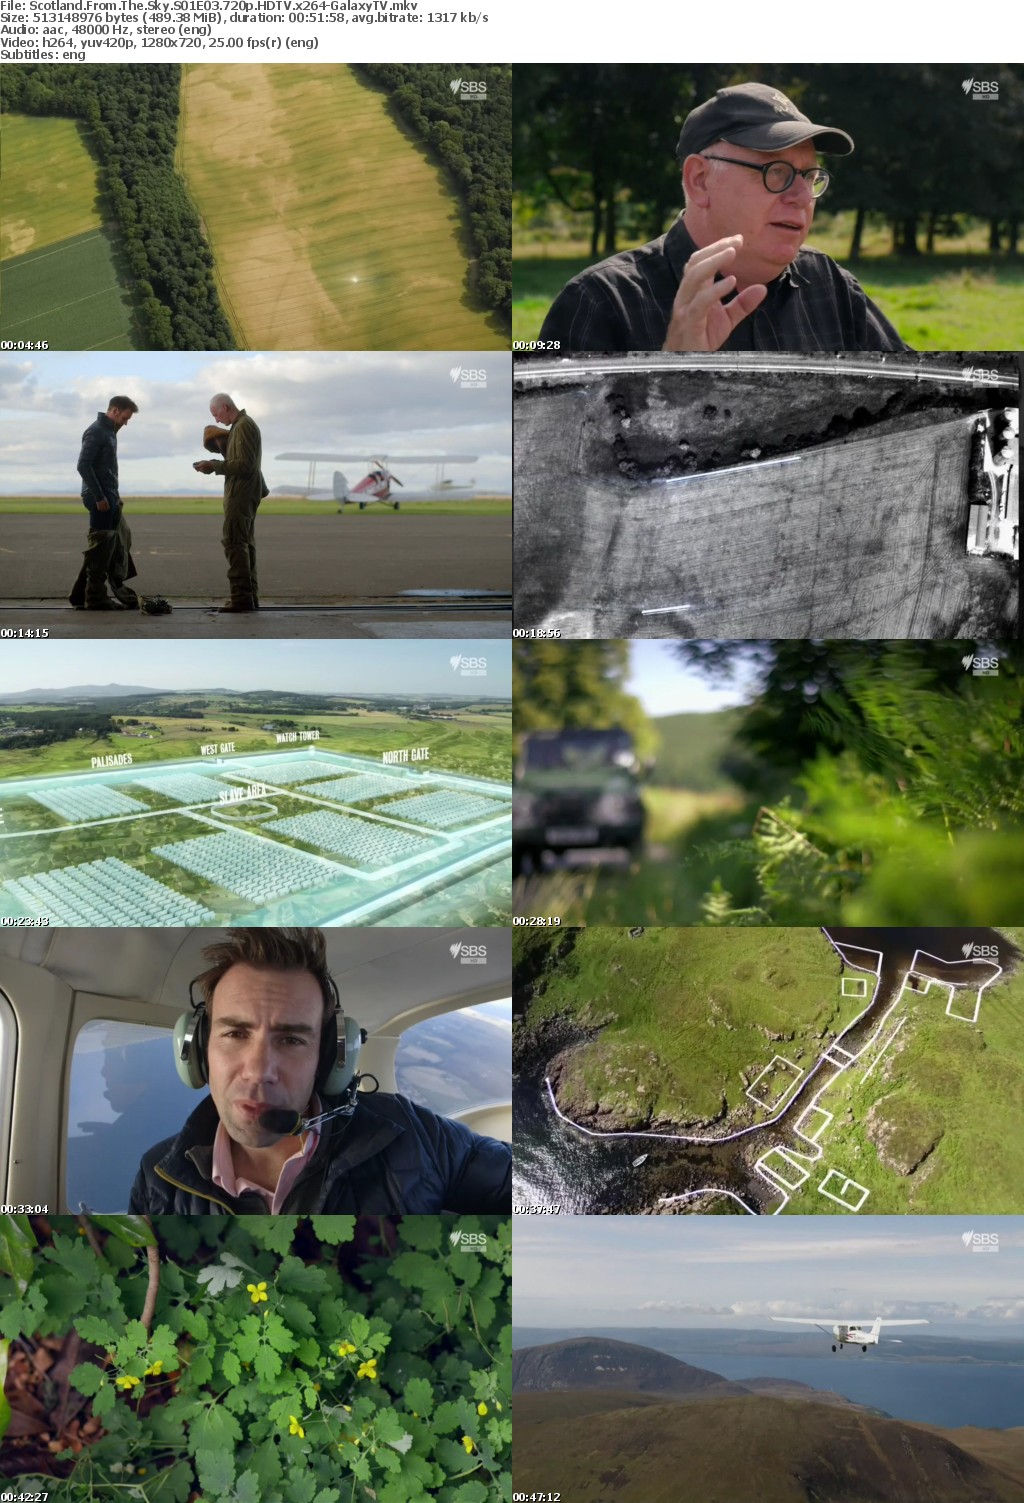 Scotland From The Sky S01 COMPLETE 720p HDTV x264-GalaxyTV